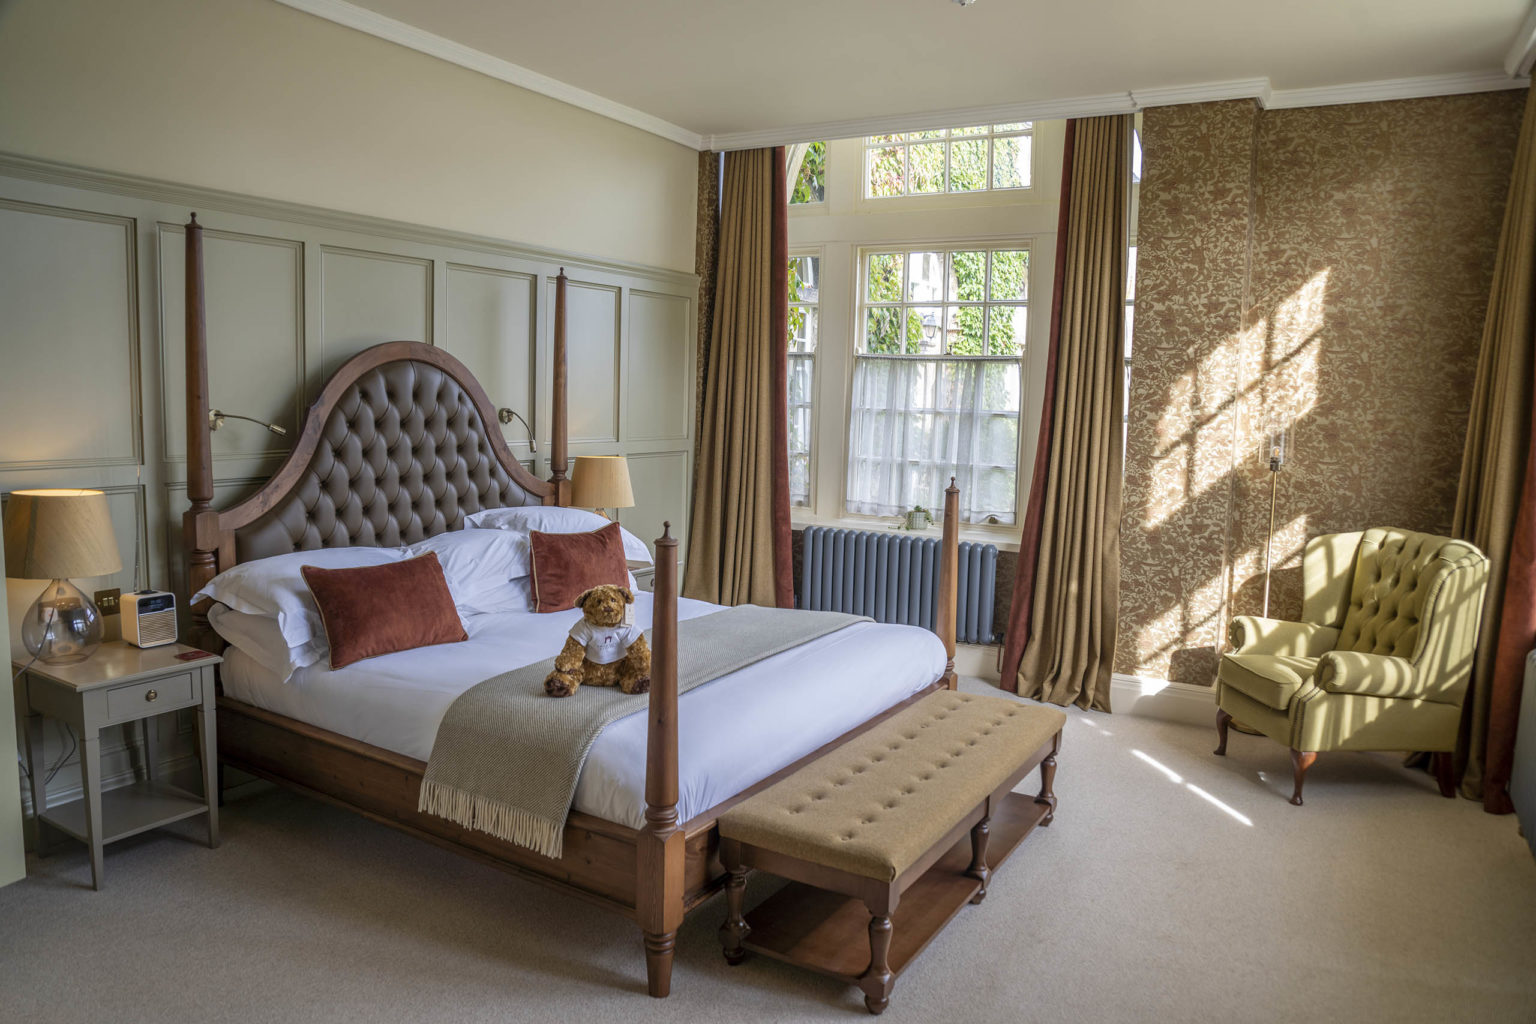 The luxury bedroom of Colsterdale Suite accommodation at the dog-friendly Swinton Park Hotel near Harrogate and the Yorkshire Dales in North Yorkshire